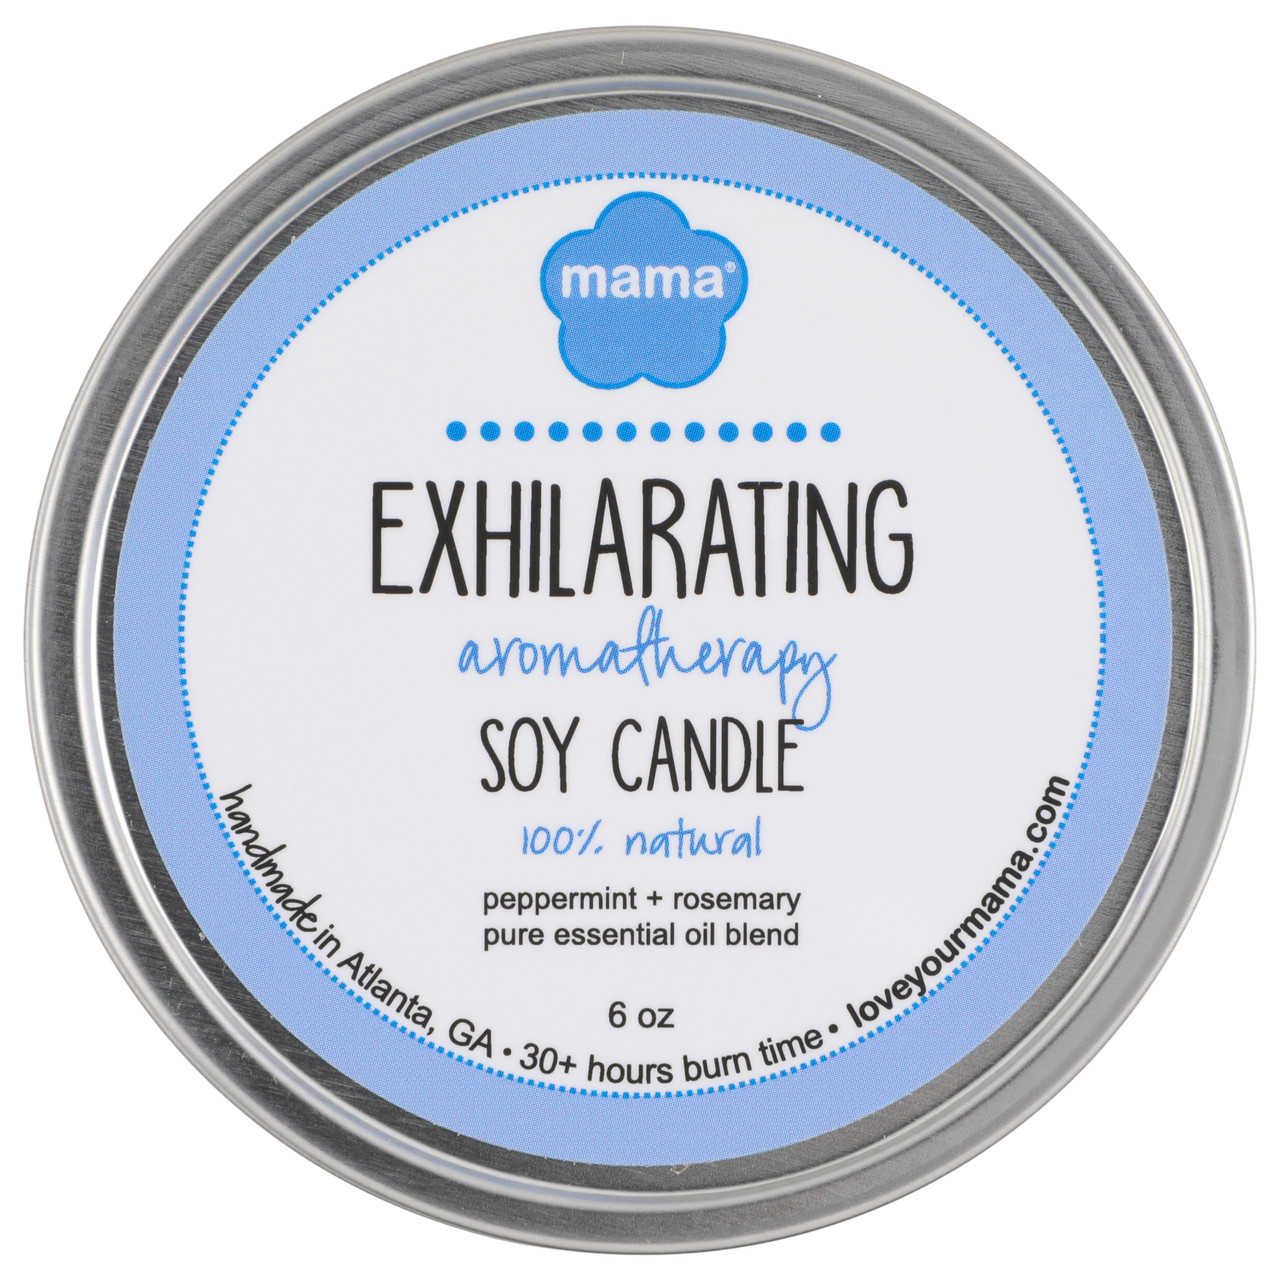 Exhilarating - Peppermint + Rosemary 6 oz soy candle in tin - 100% natural + hand-poured